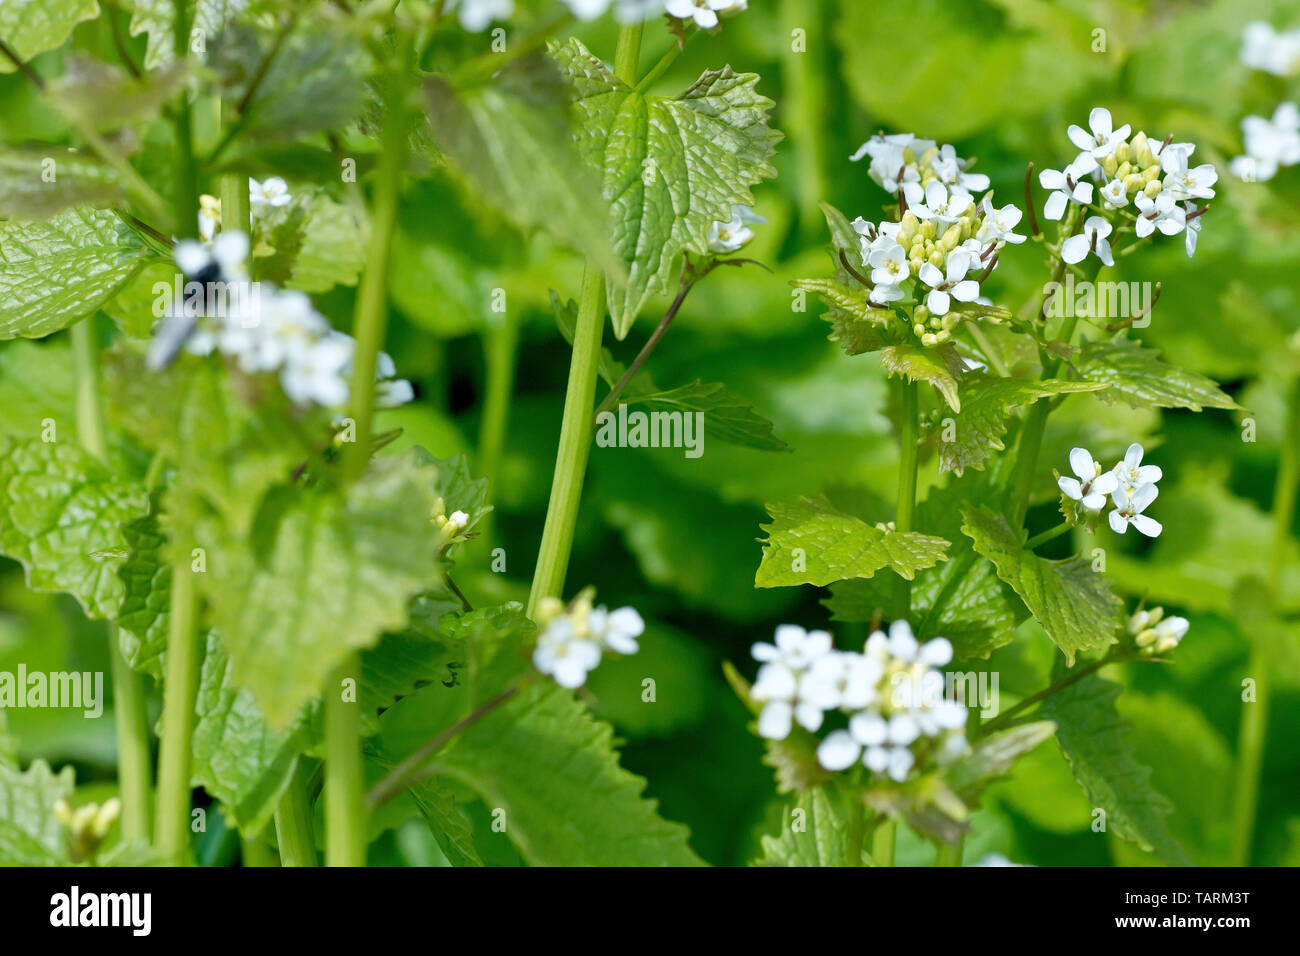 Garlic Mustard (alliaria petiolata), also known as Jack-by-the-hedge, a general close up of the plant showing the flowers and leaves. Stock Photo